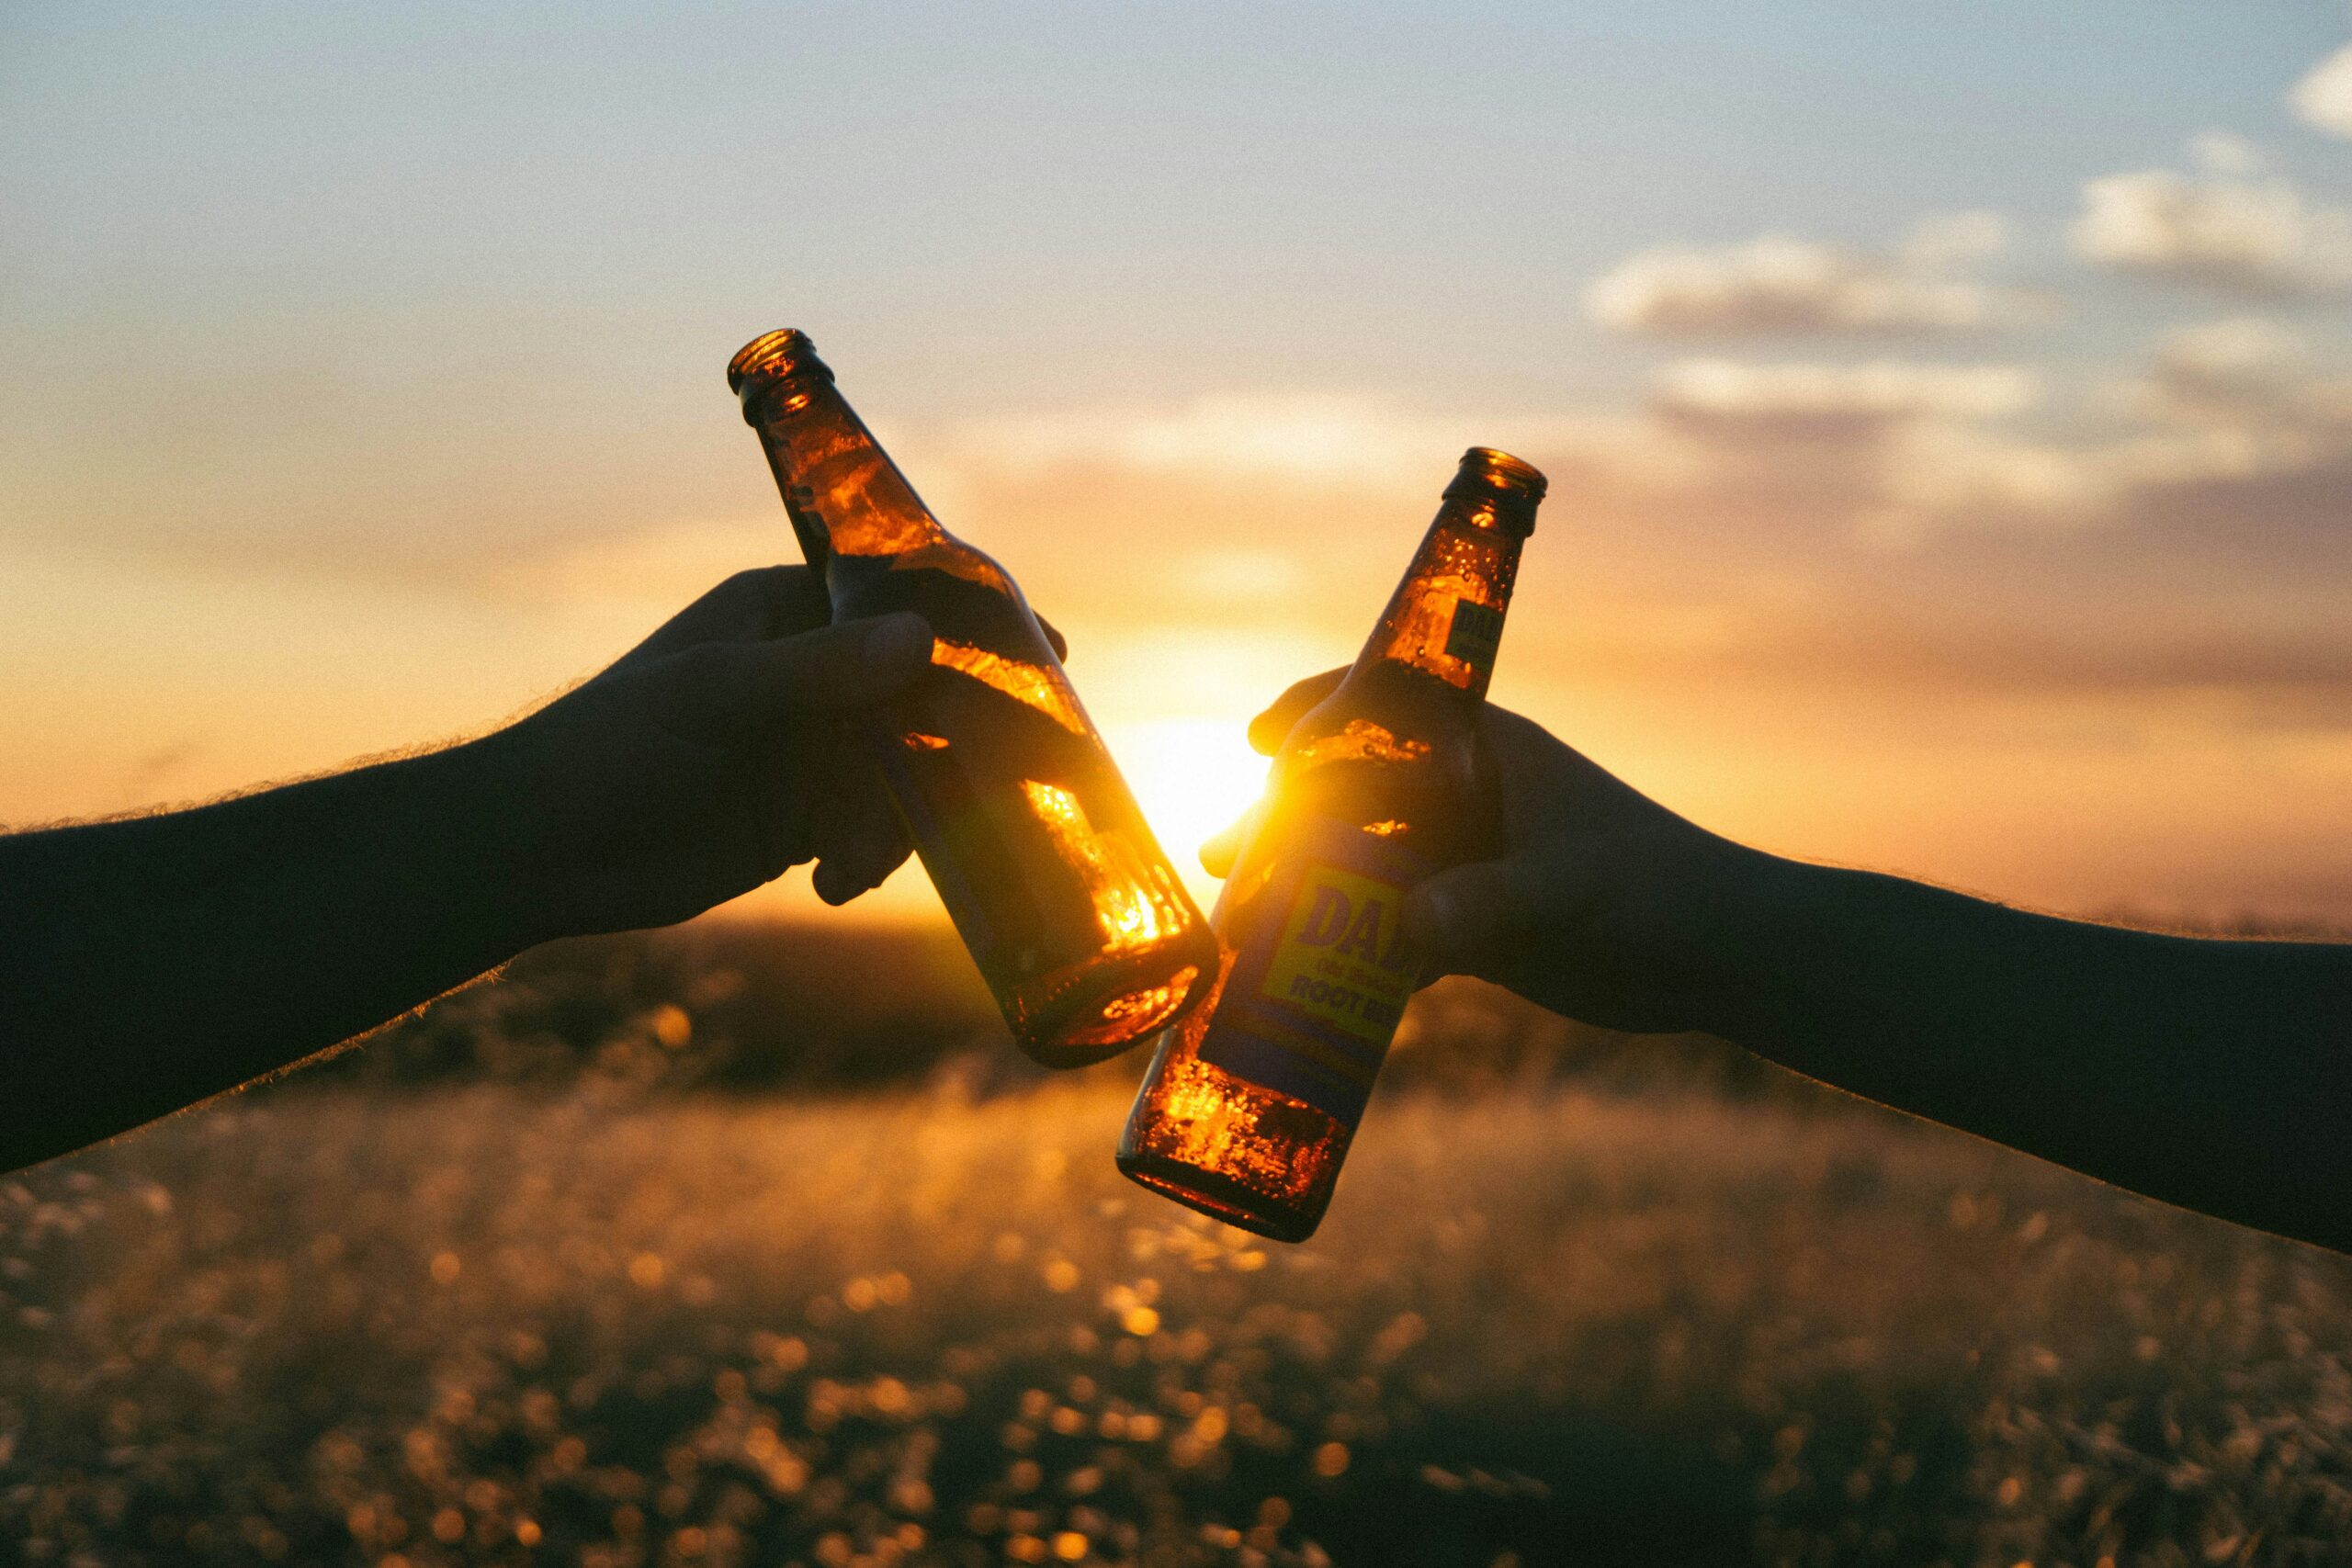 James Donaldson on Mental Health - 'Alcohol can exacerbate underlying mental health issues': Alcohol use linked to suicide and self-harm, studies find